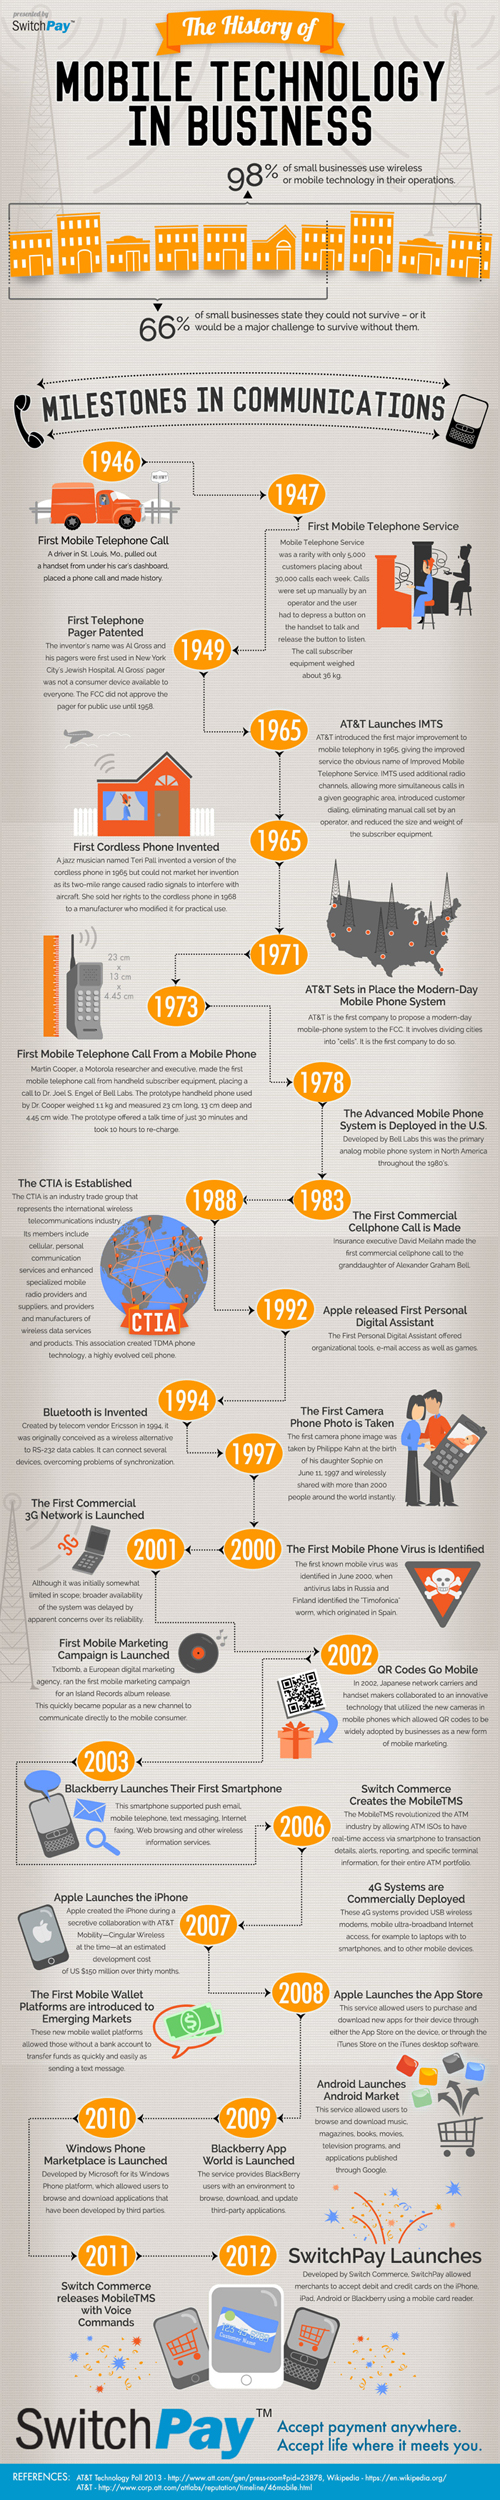 History of Mobile Technology 2 The History of Mobile Technology in Business